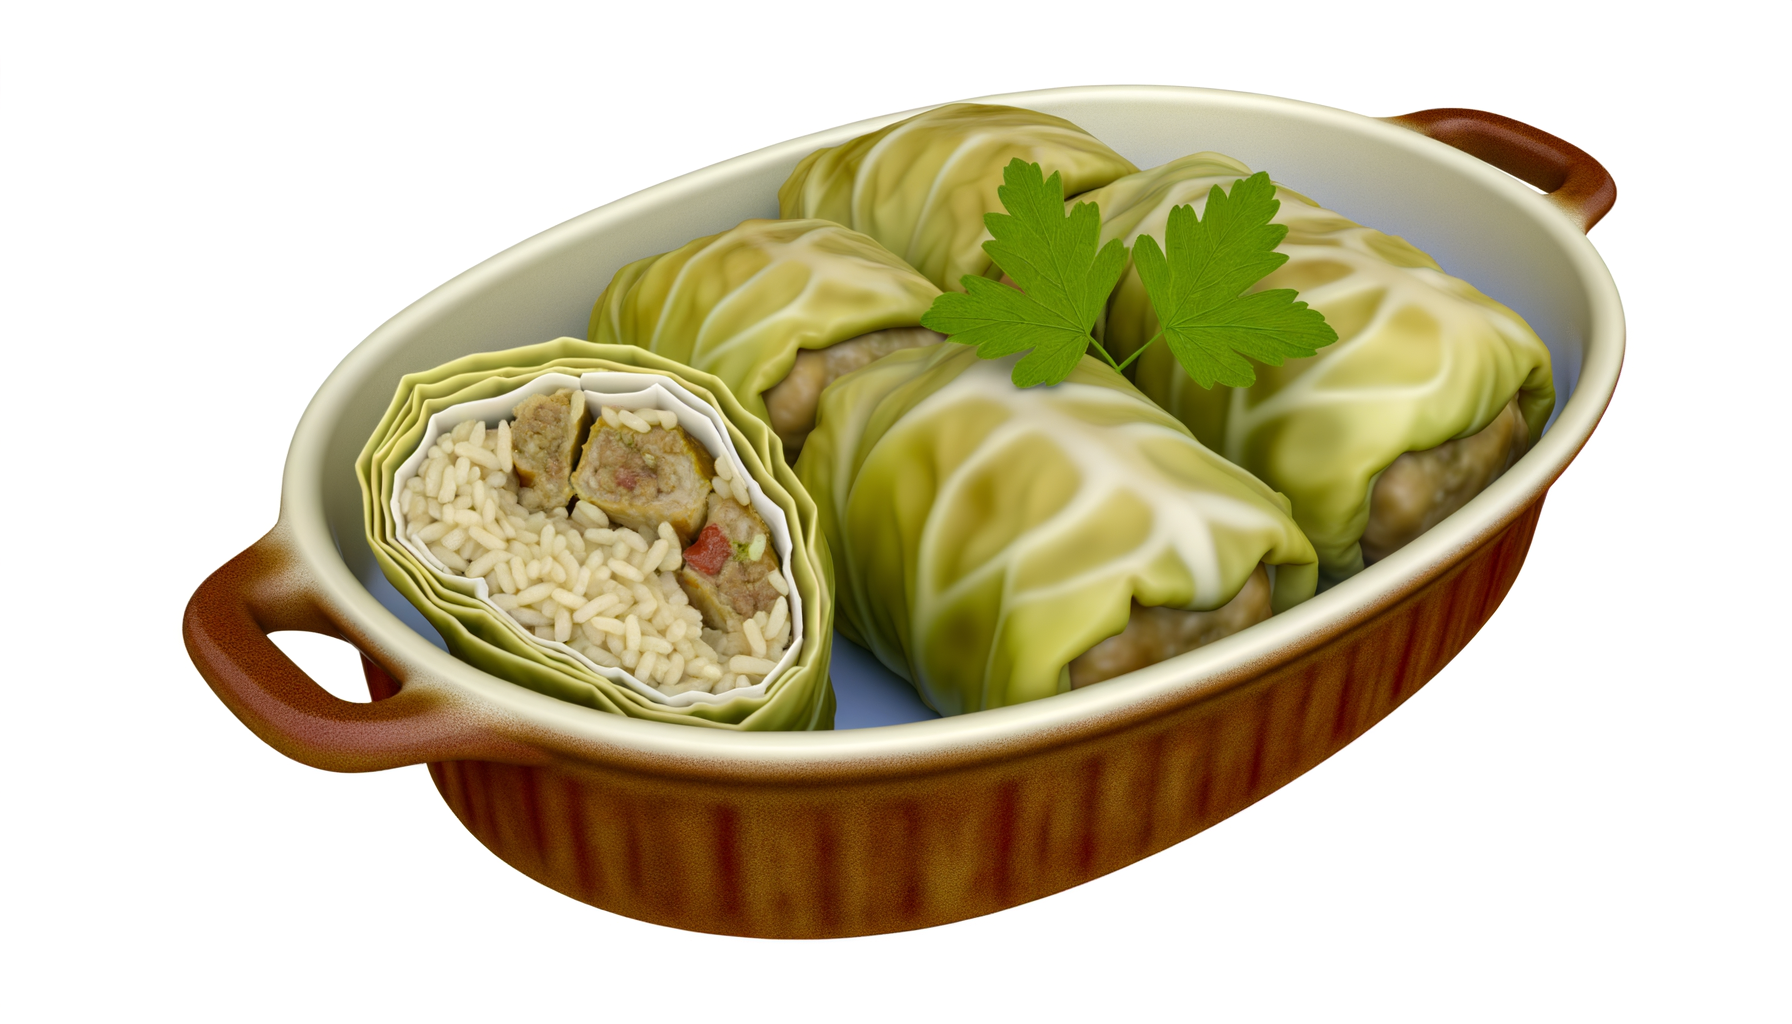 A baked dish of stuffed cabbage rolls with the filling of meat and rice visible, garnished with fresh parsley